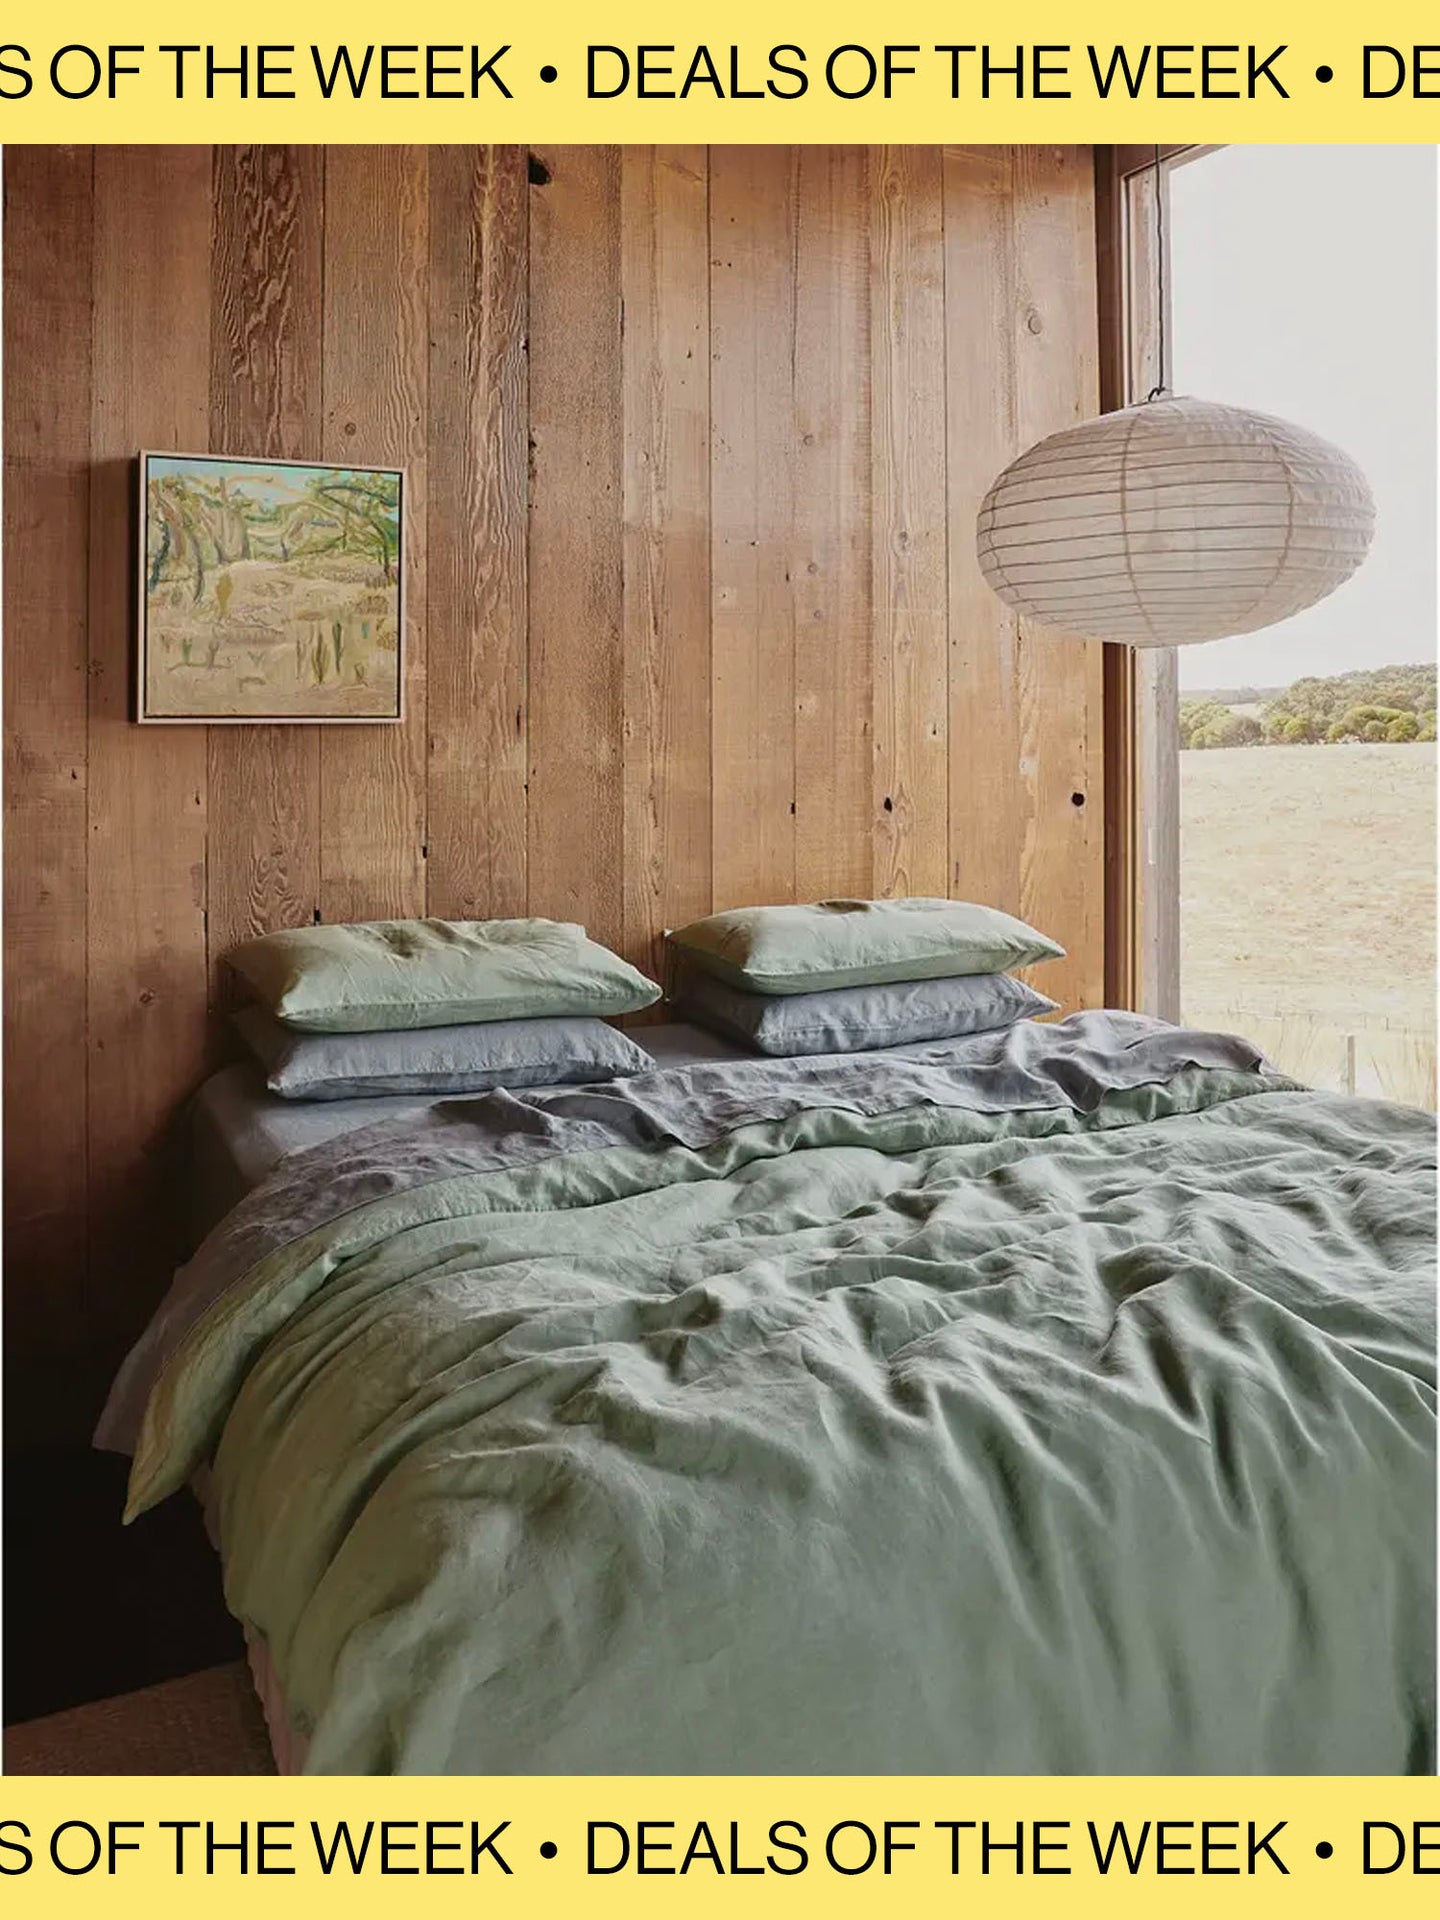 Messy bed with wood panel wall and paper pendant light hanging next to bed for Nordstrom Deals